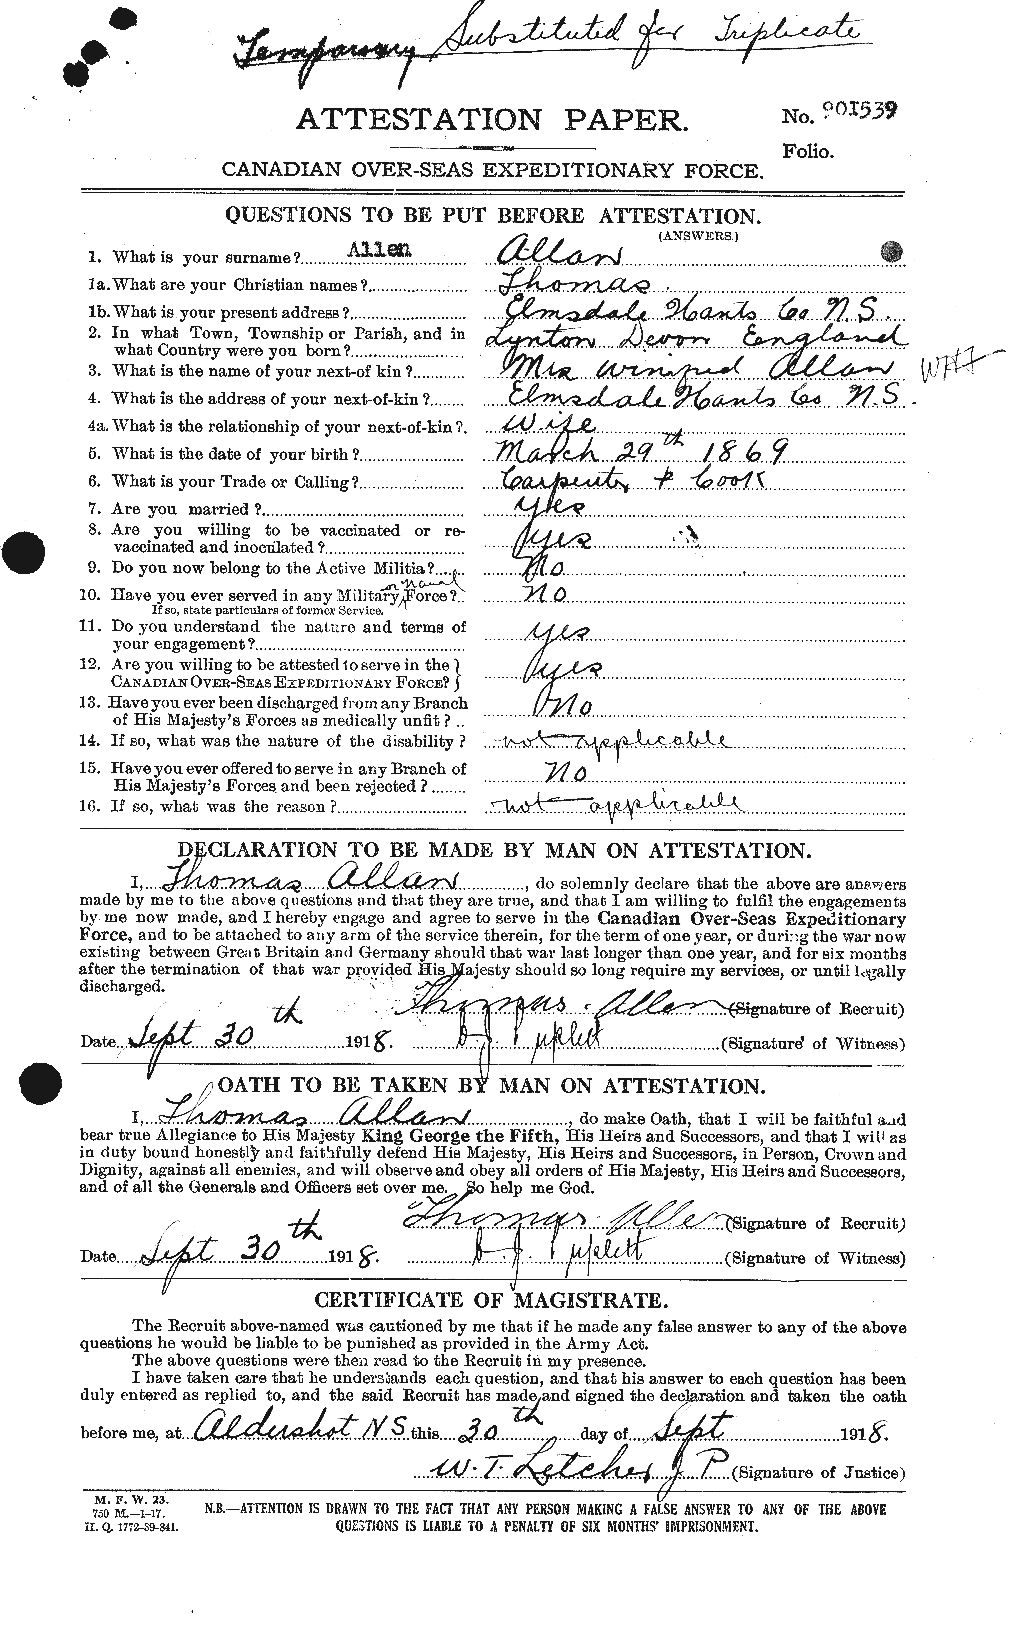 Personnel Records of the First World War - CEF 206985a